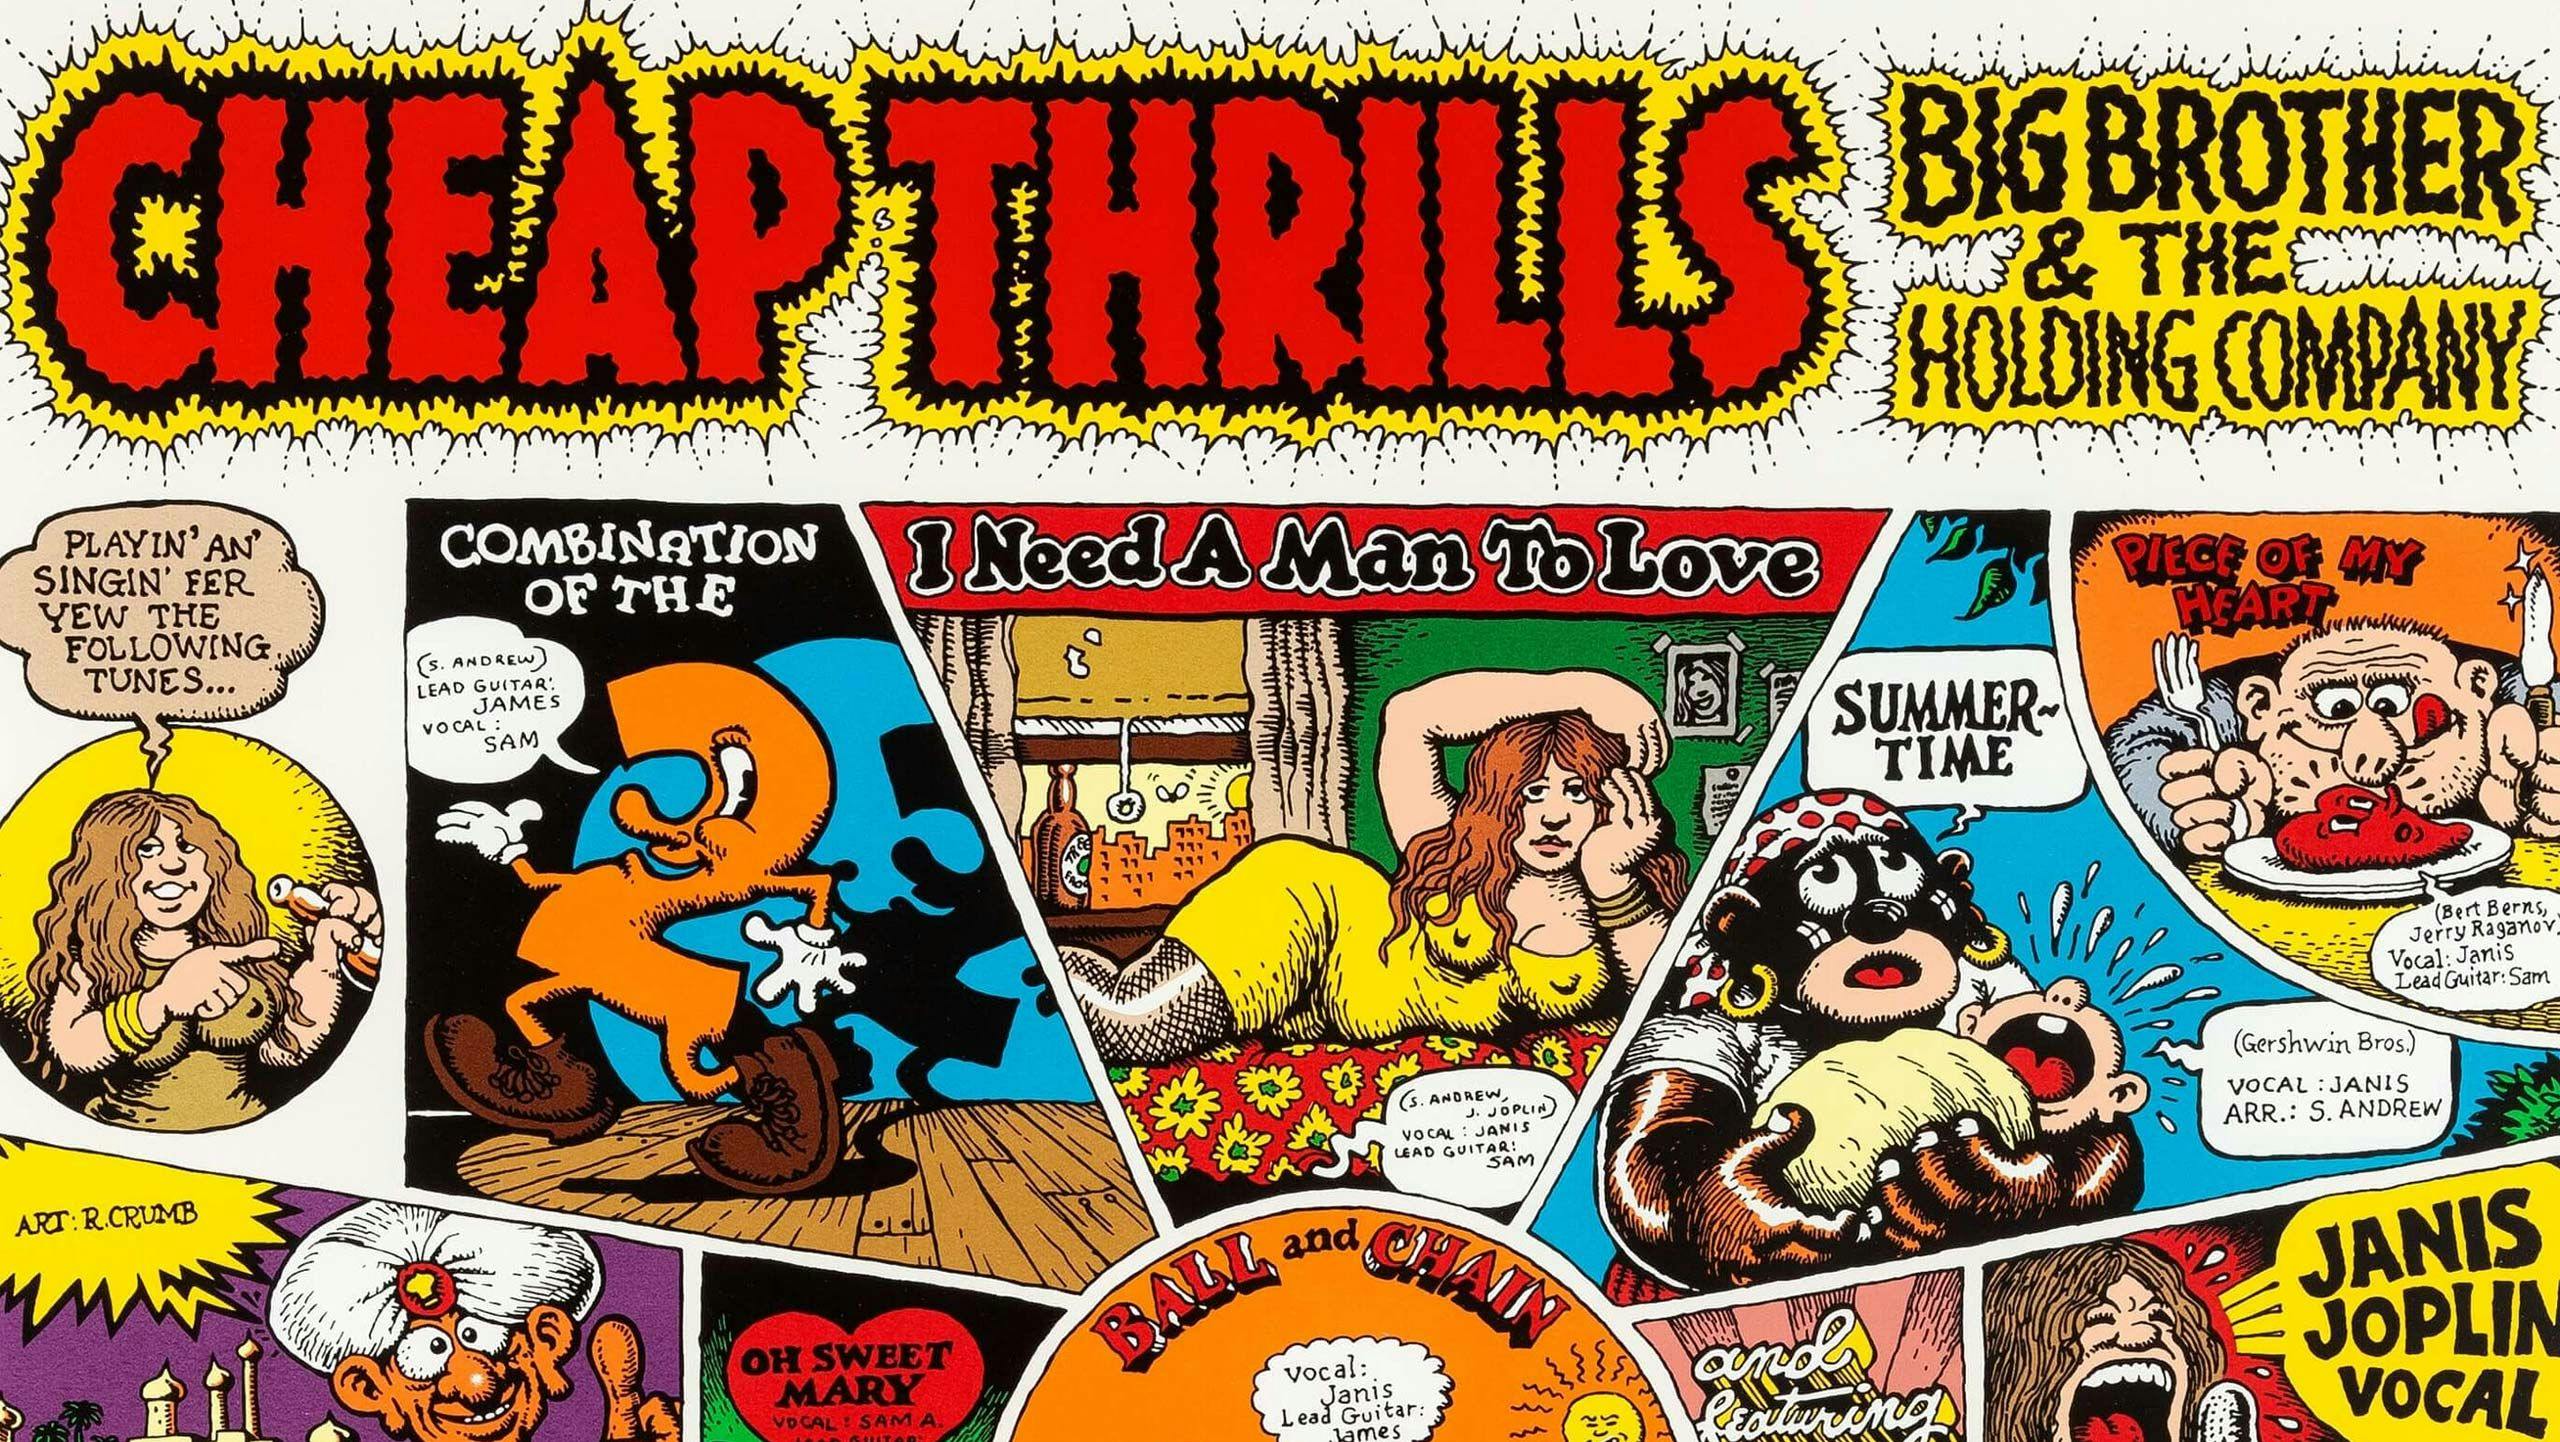 Illustration by R. Crumb, titled “Cheap Thrills” Big Brother and the Holding Company, dated 1968.